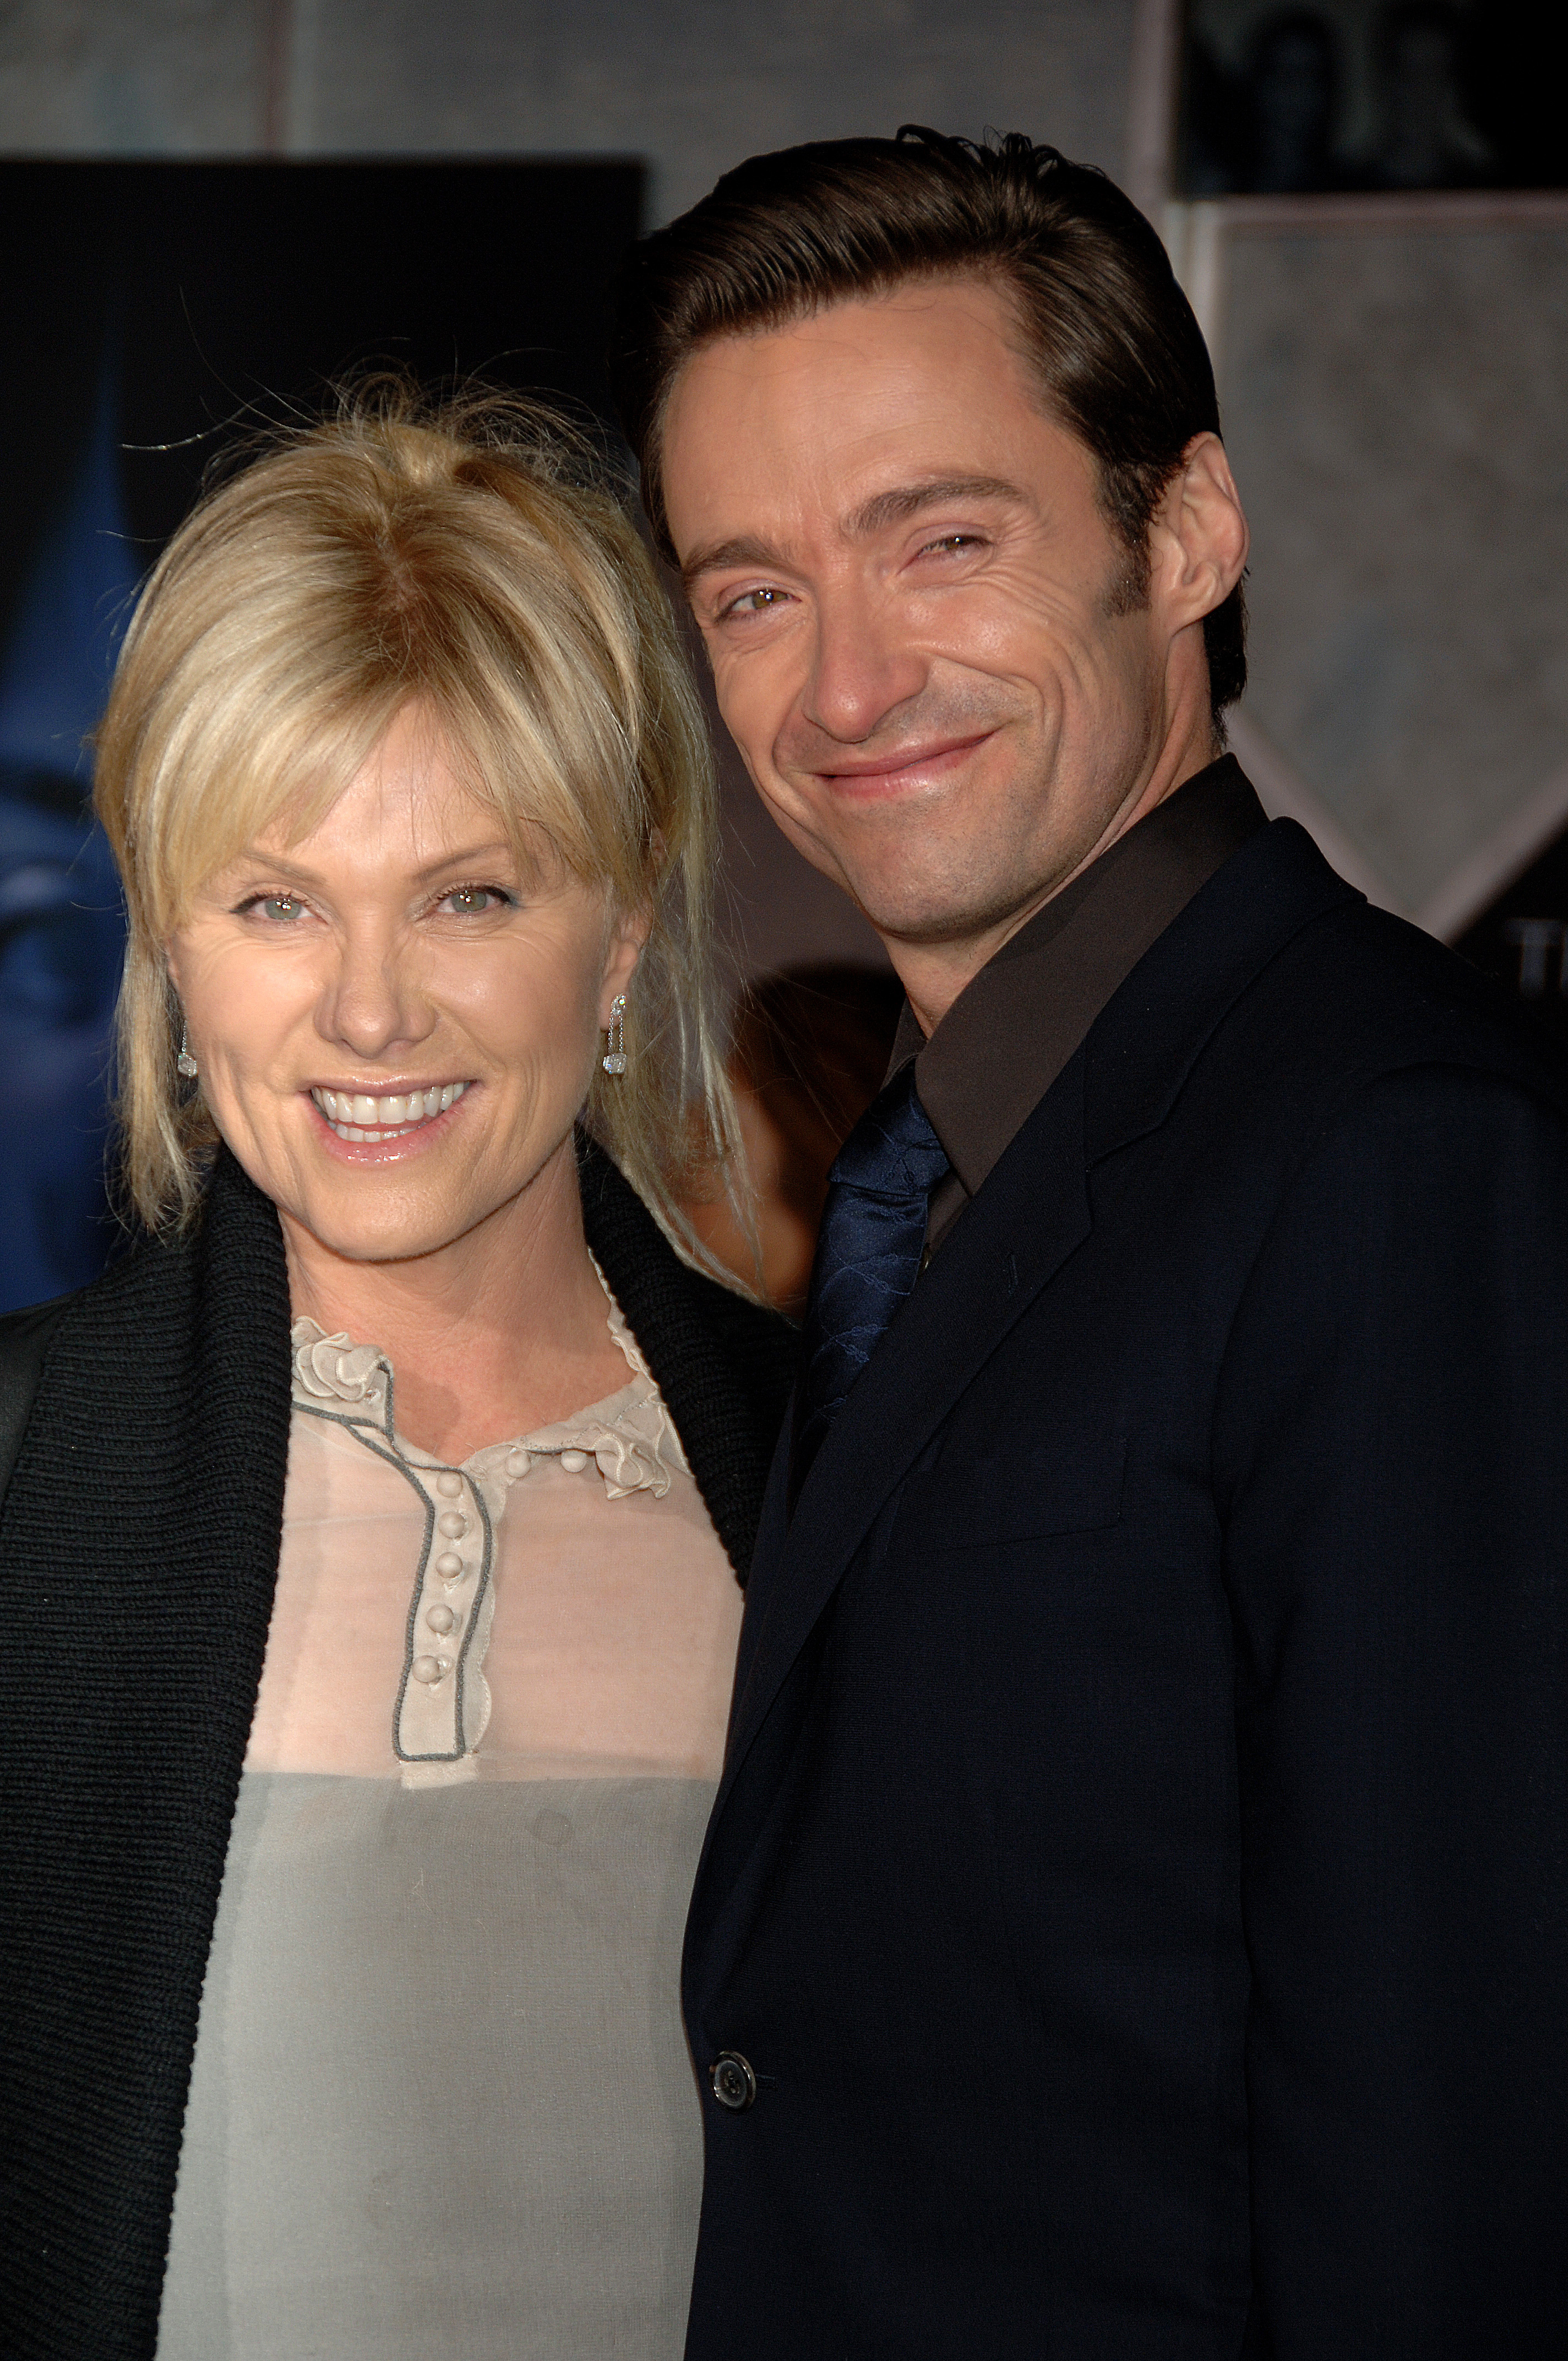 Deborra-Lee Furness and Hugh Jackman at Hollywood premiere of "The Prestige" in 2006 | Source: Getty Images